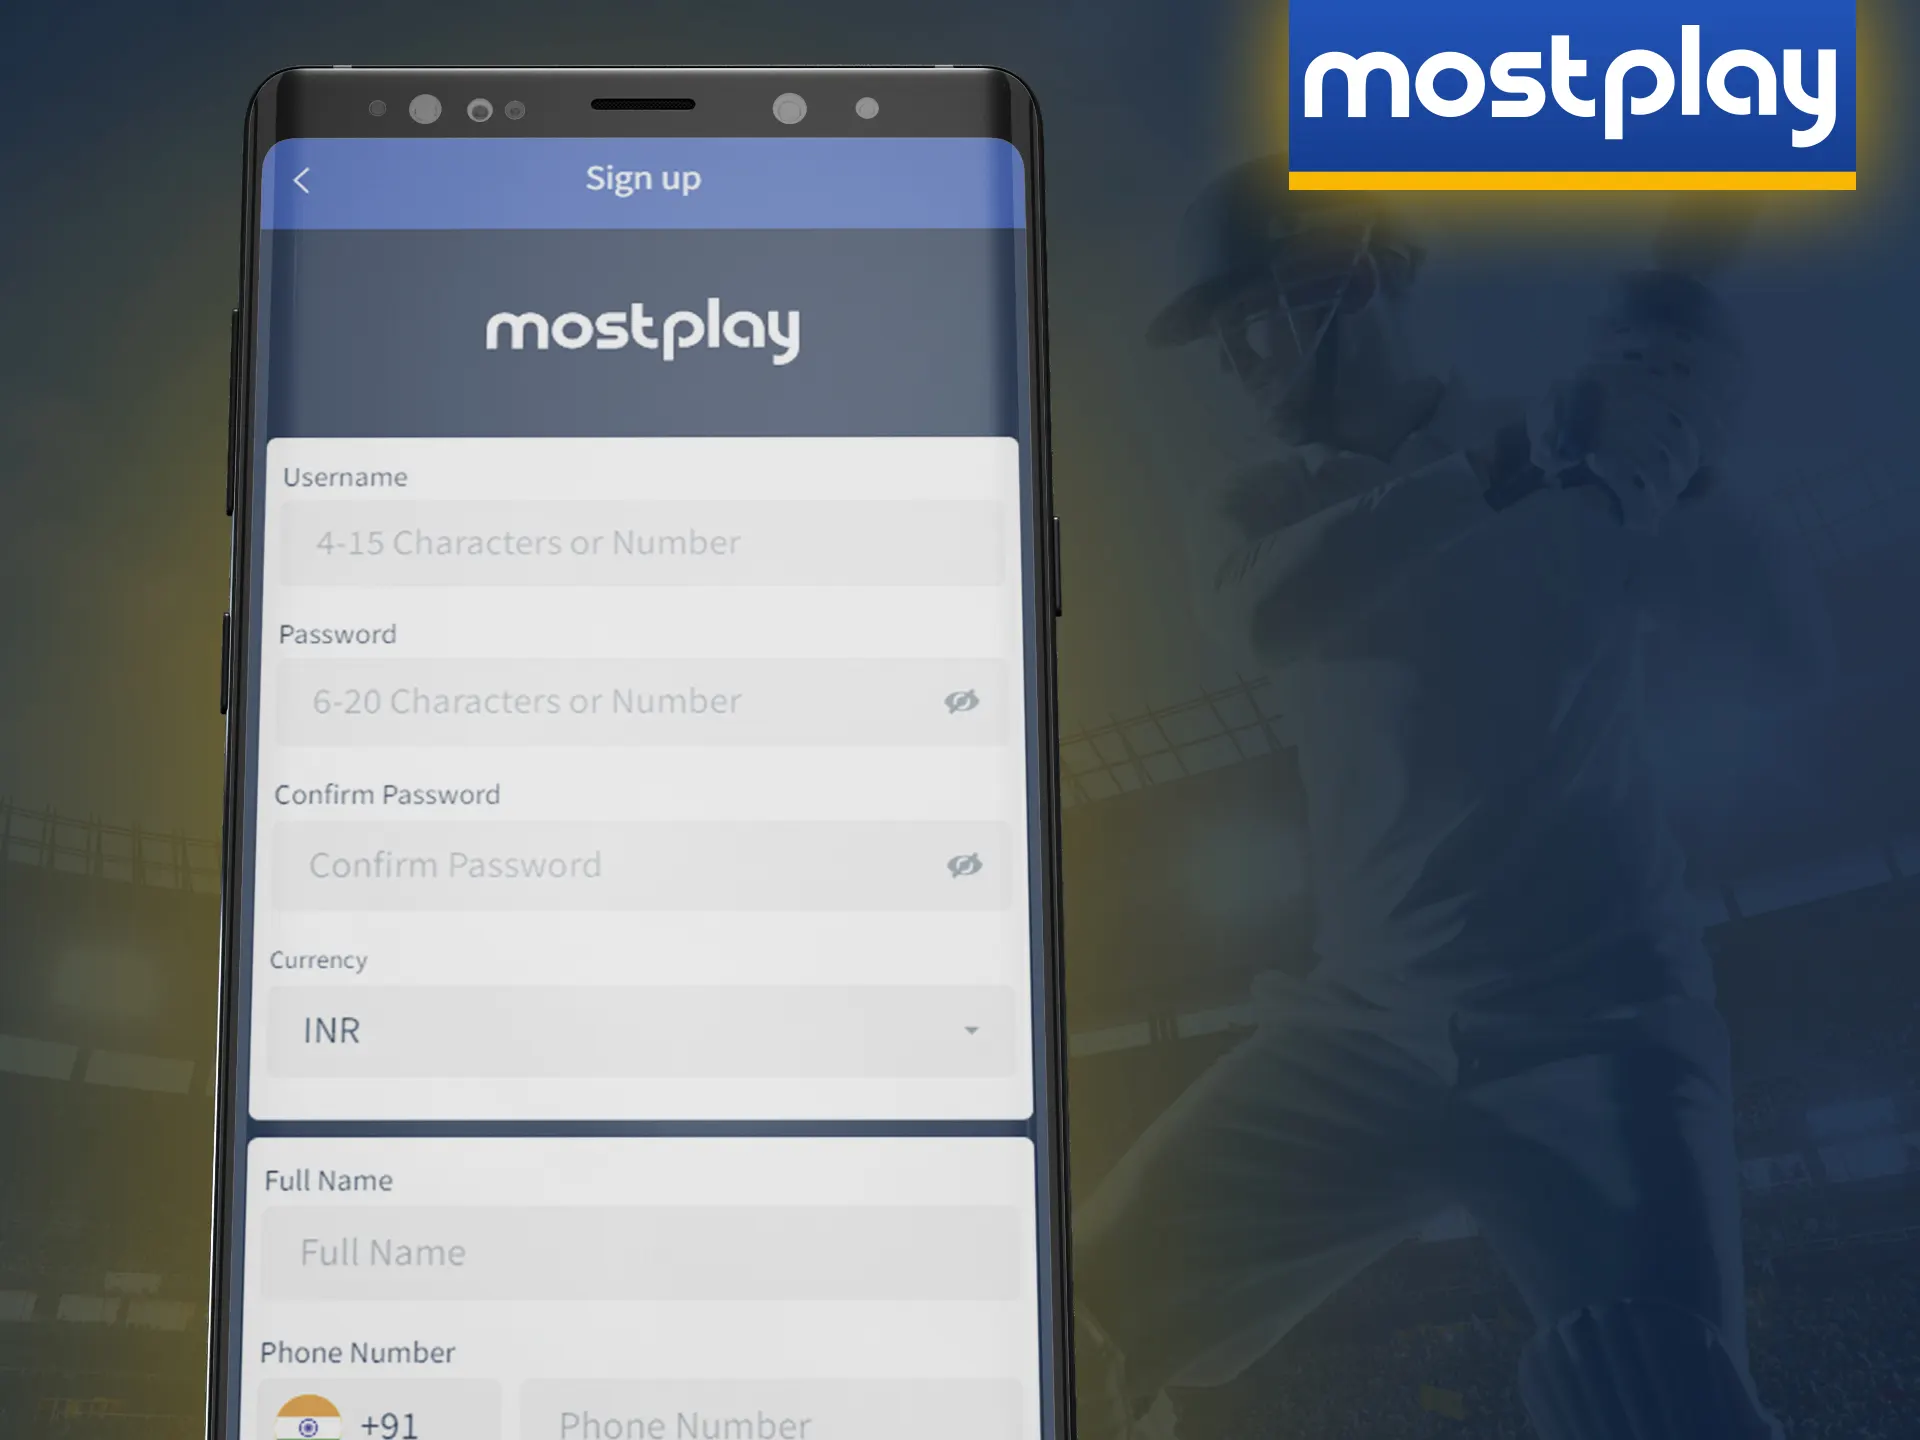 Make your own Mostplay account quicker with the app.